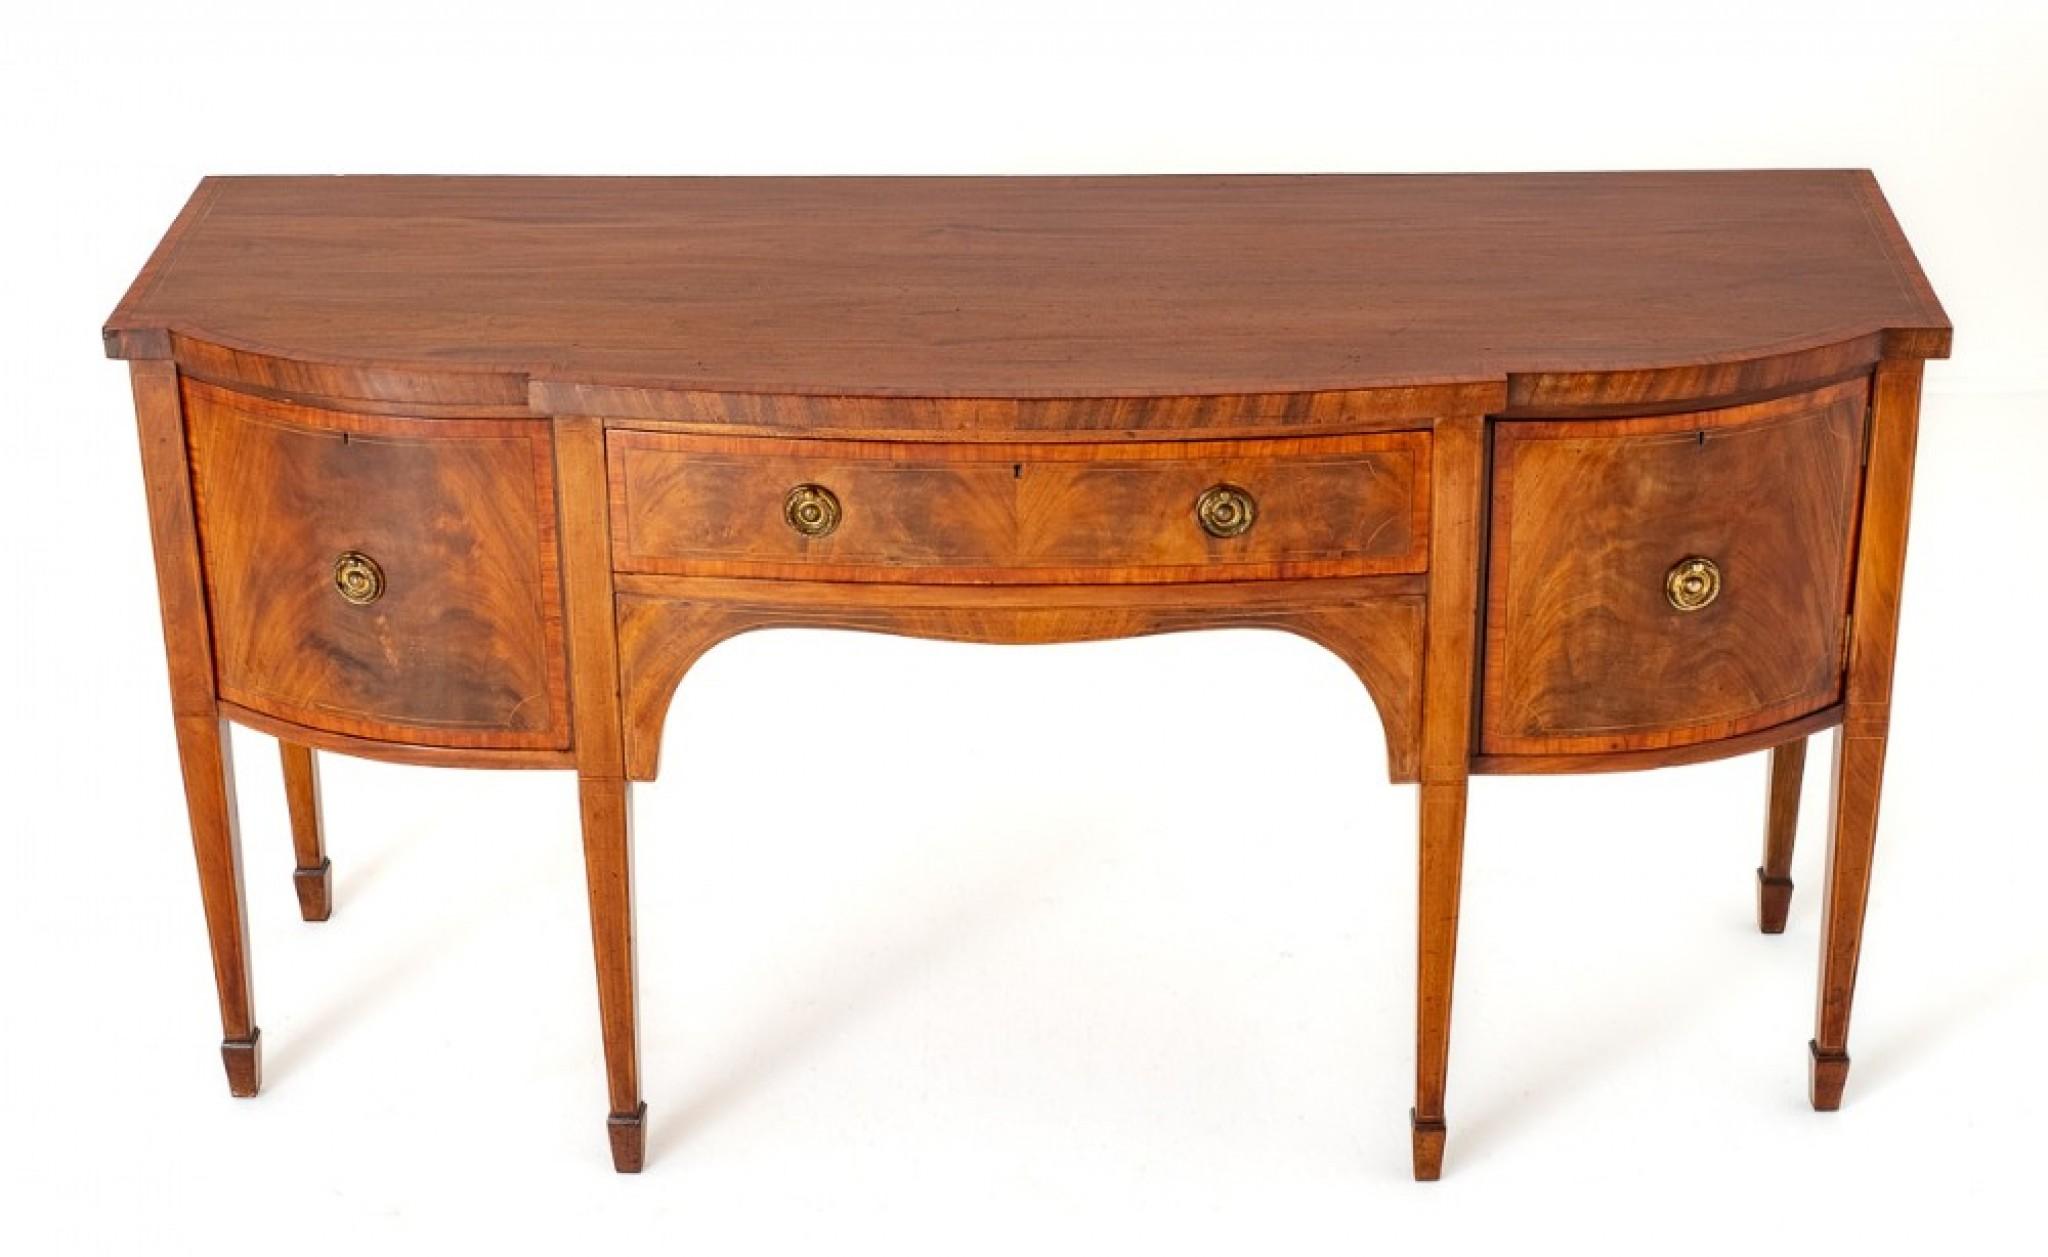 Late 19th Century Antique Regency Sideboard Mahogany Buffet Server 1880 For Sale